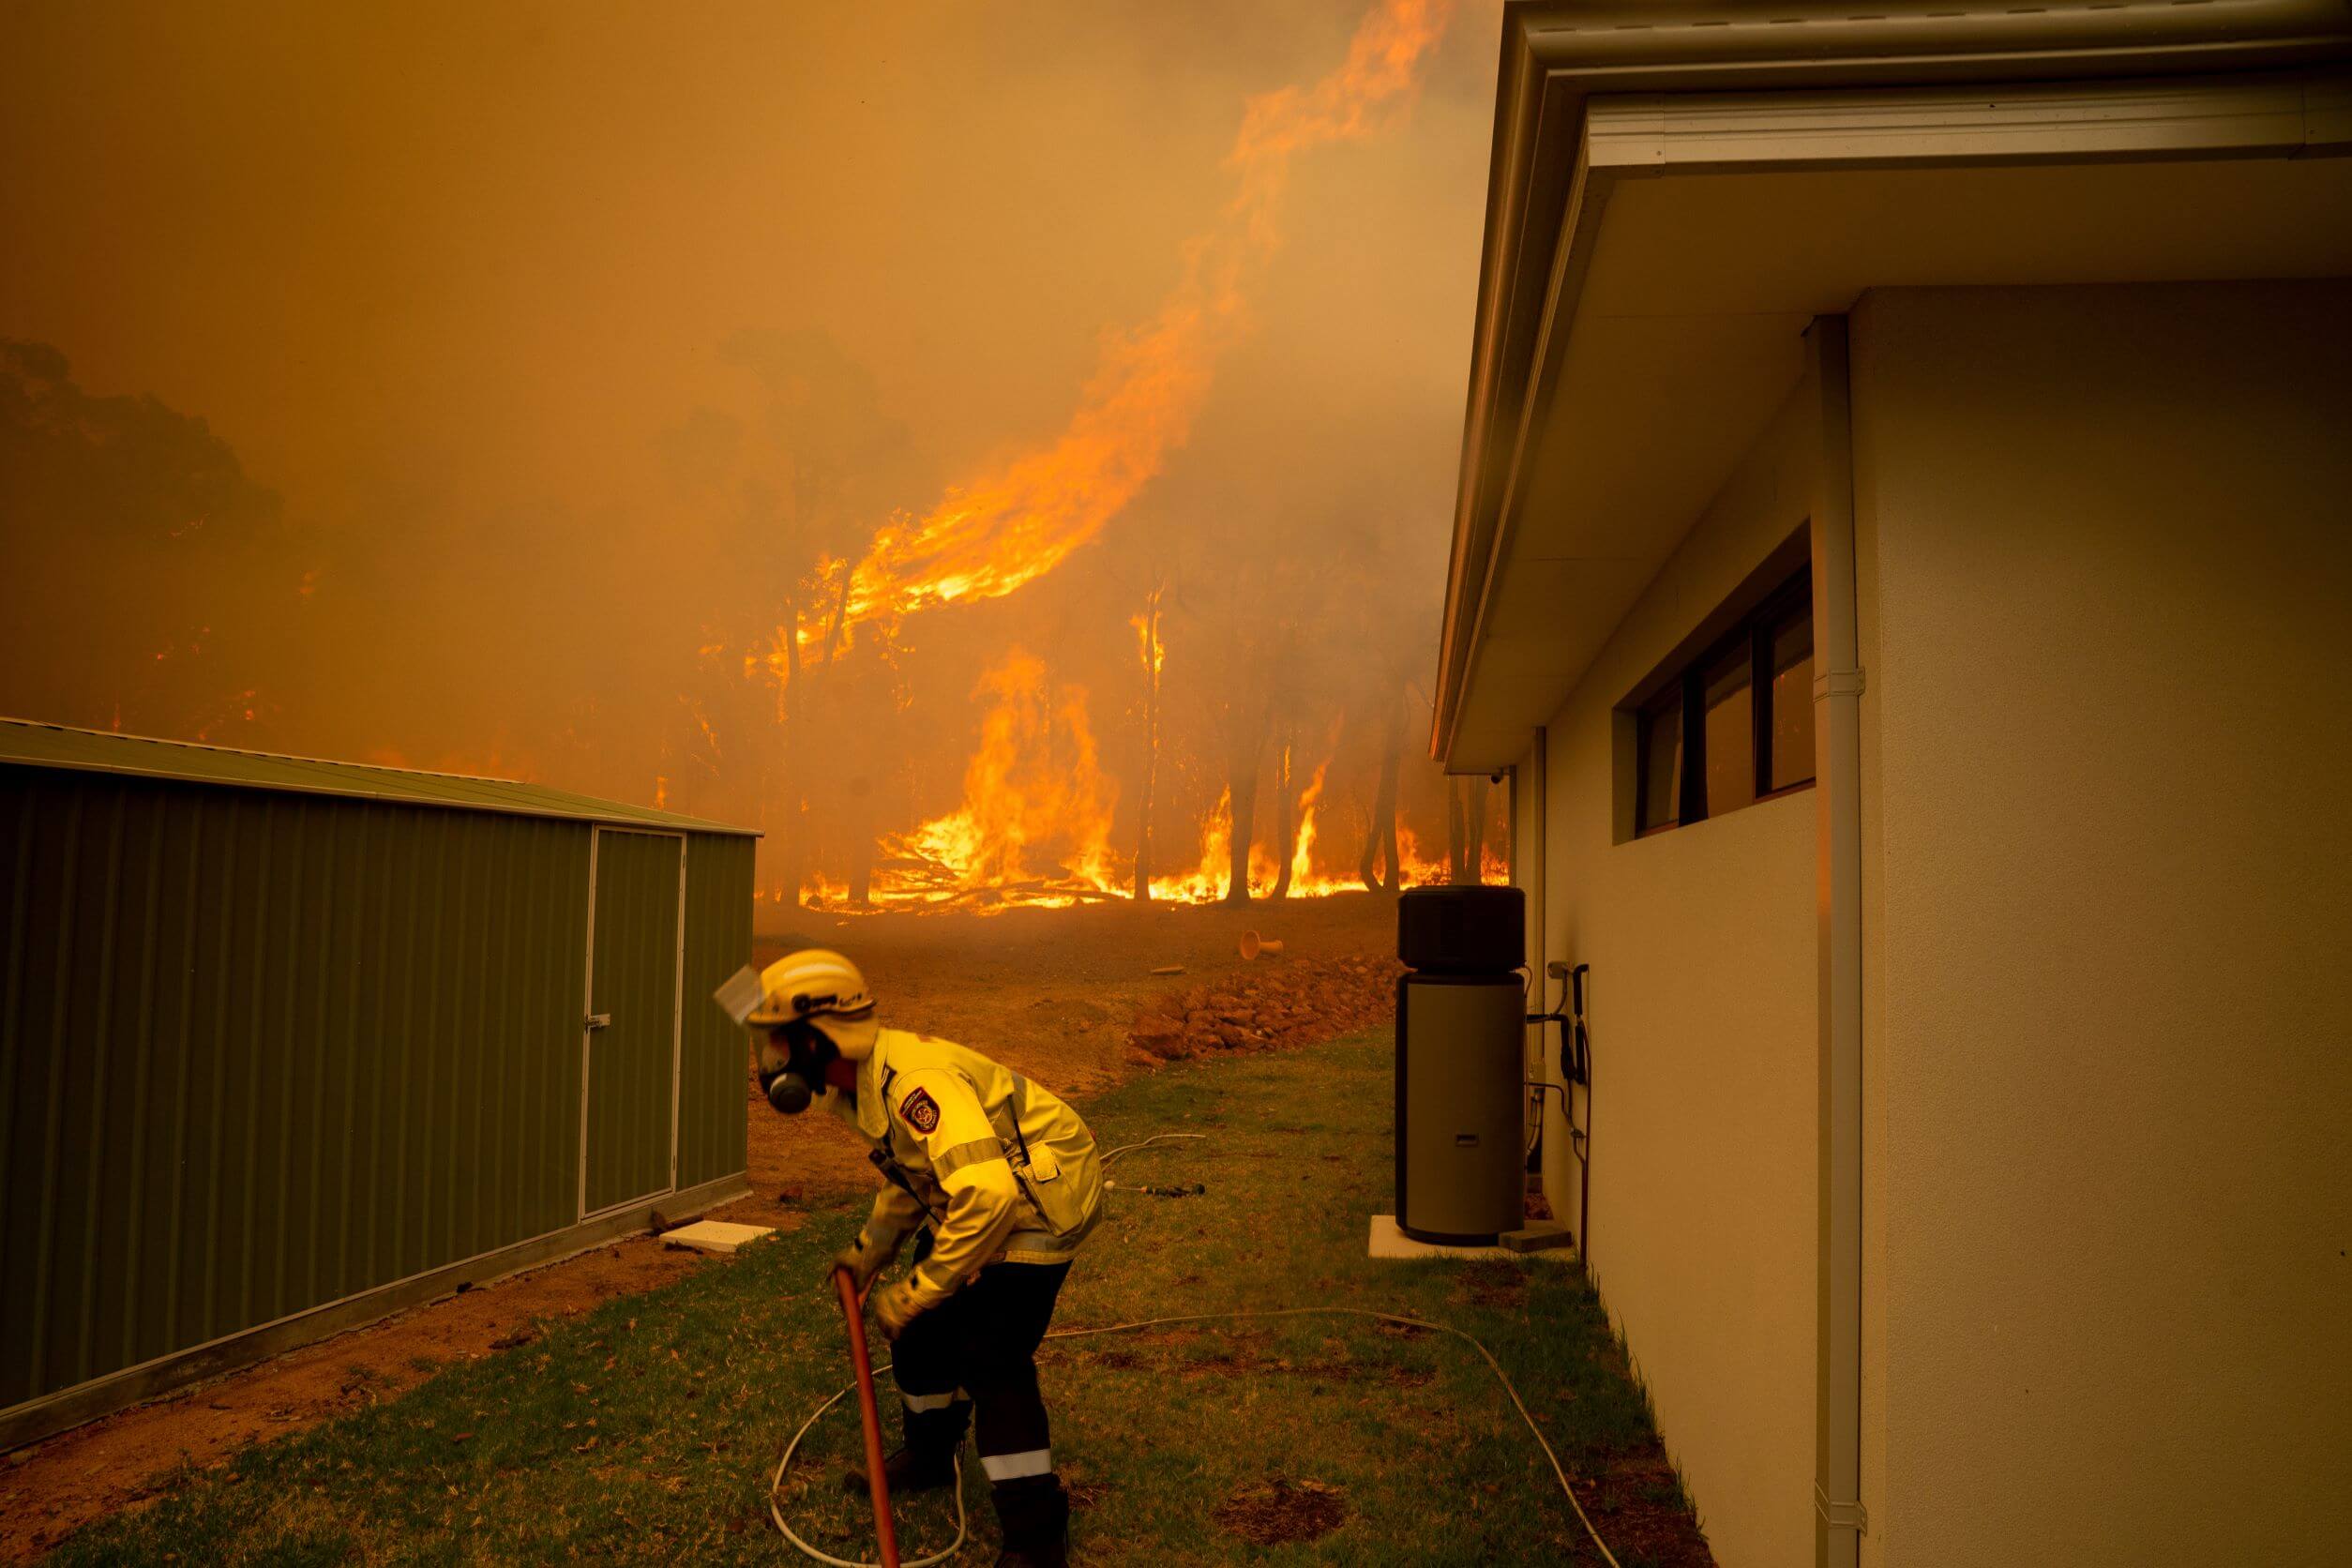 The Wooroloo bushfire threatened homes and lives